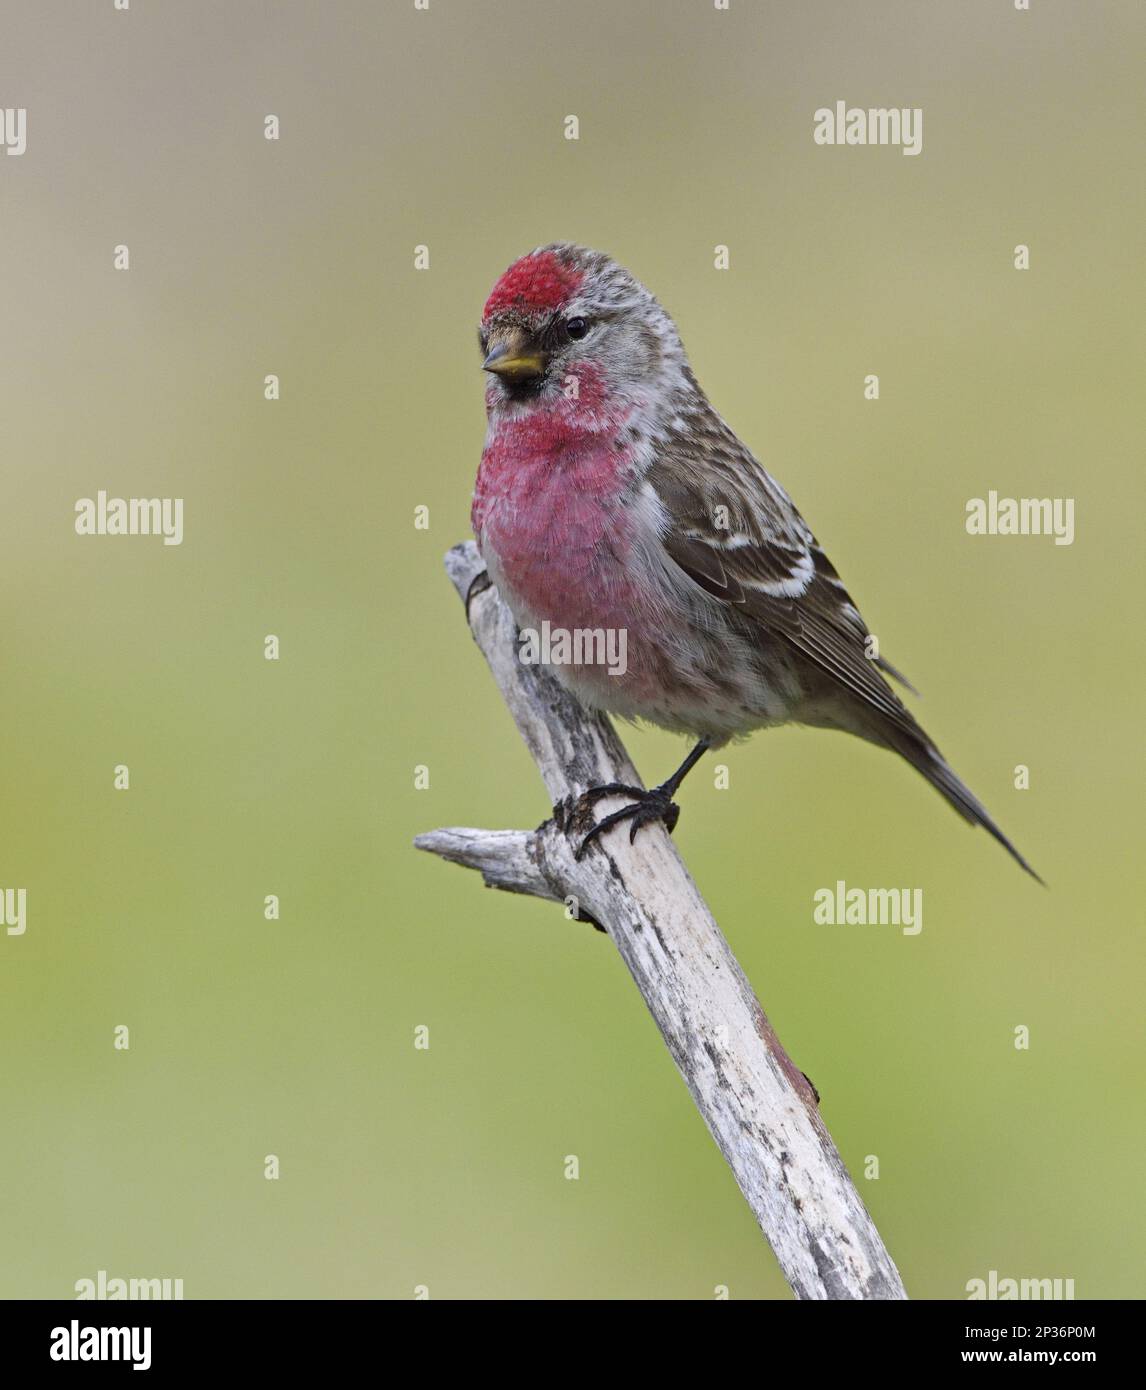 Common Redpoll (Carduelis flammea), Common Redpoll Songbirds, Animals, Birds, Finches, Common Redpoll adult male, perched on twig, Norway Stock Photo